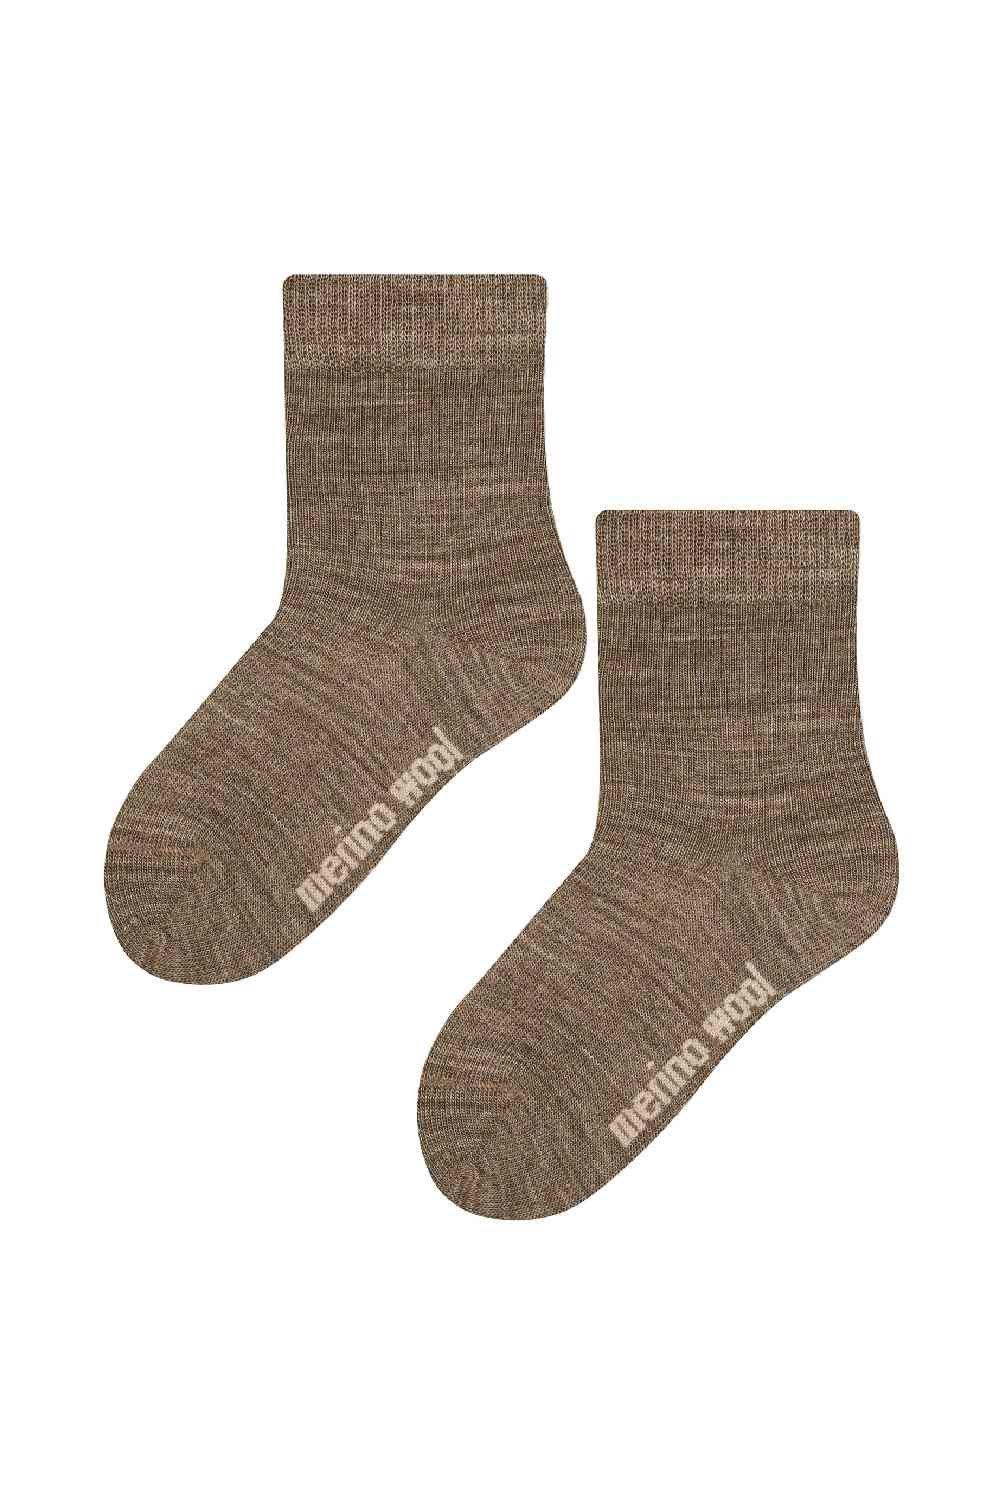 Warm Merino Wool Thermal Knitted Ribbed Socks for Winter